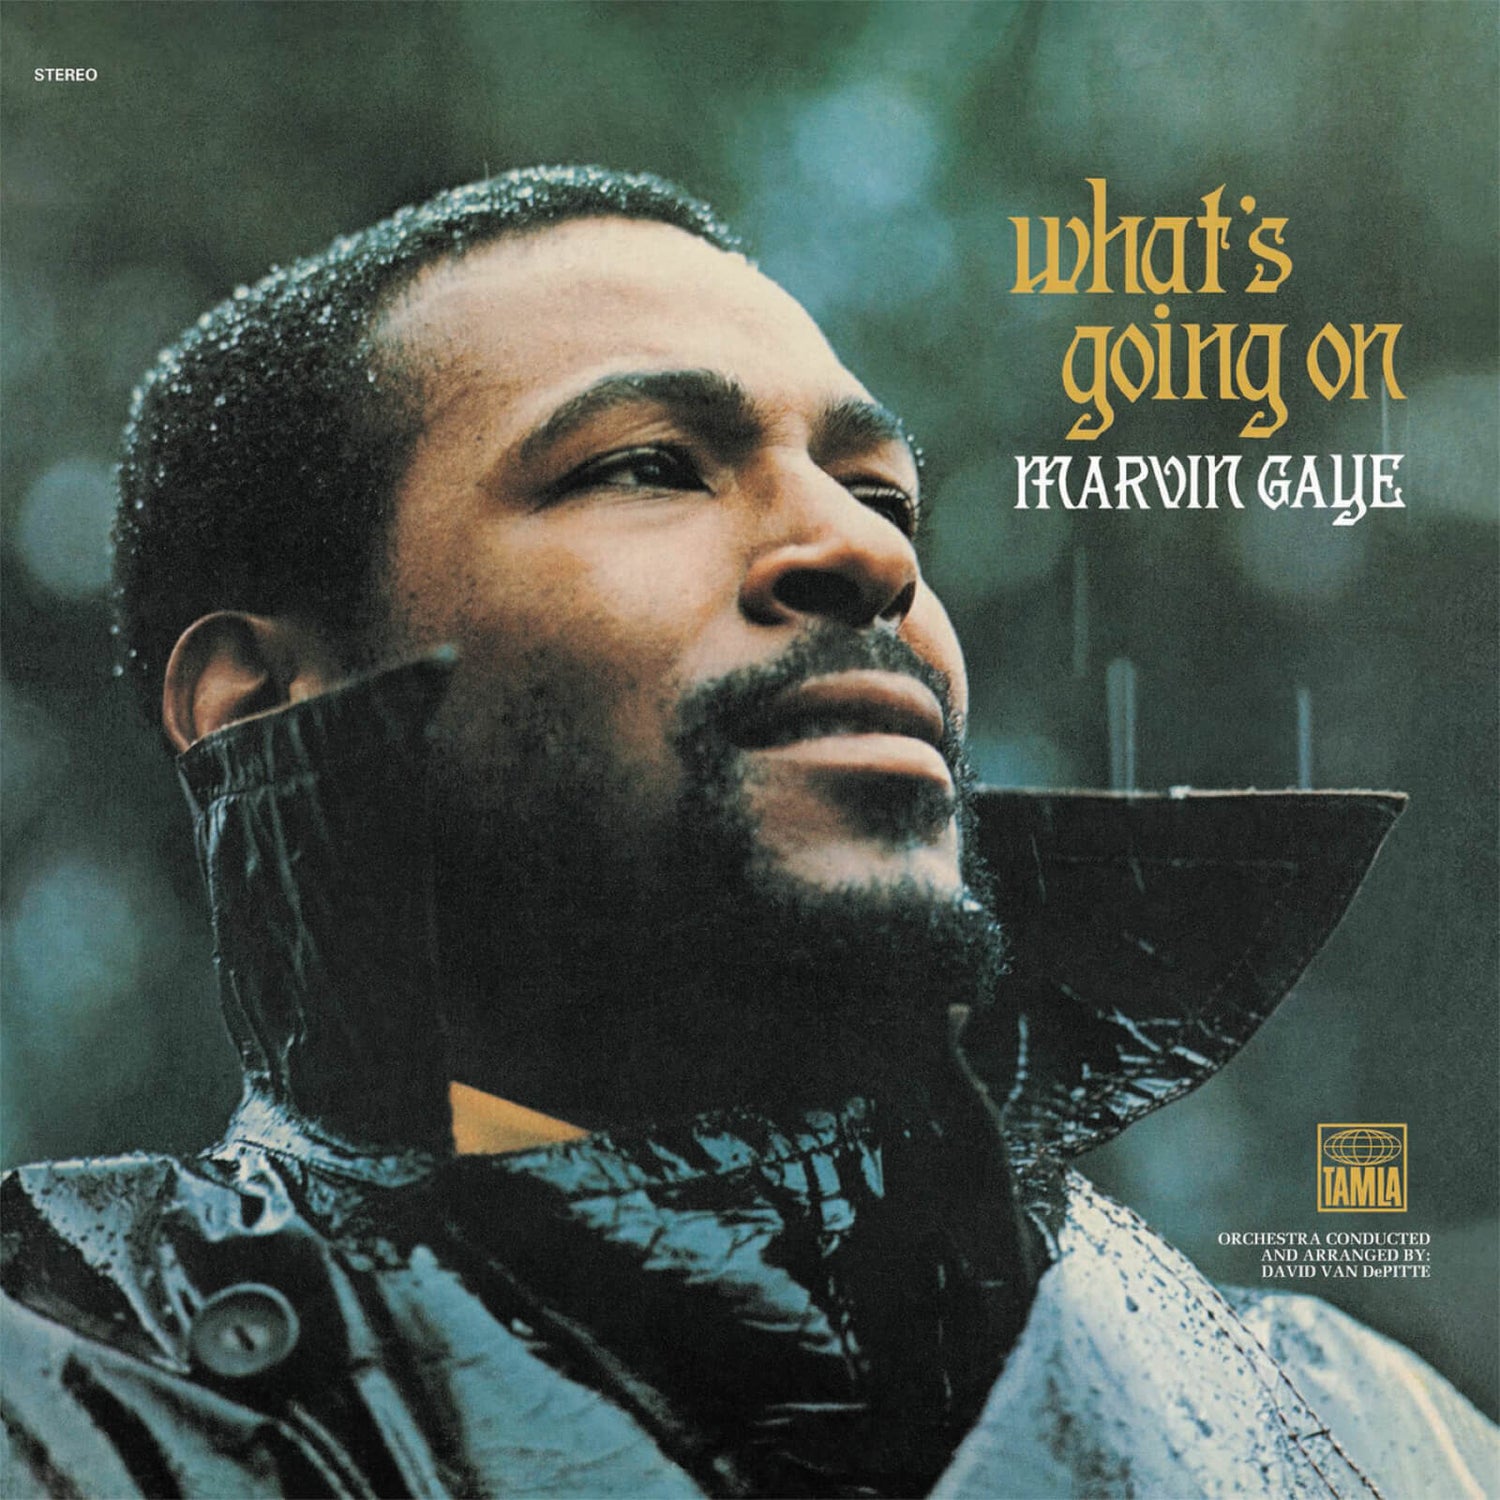 Marvin Gaye - What's Going On (50th Anniversary) Vinyl 2LP